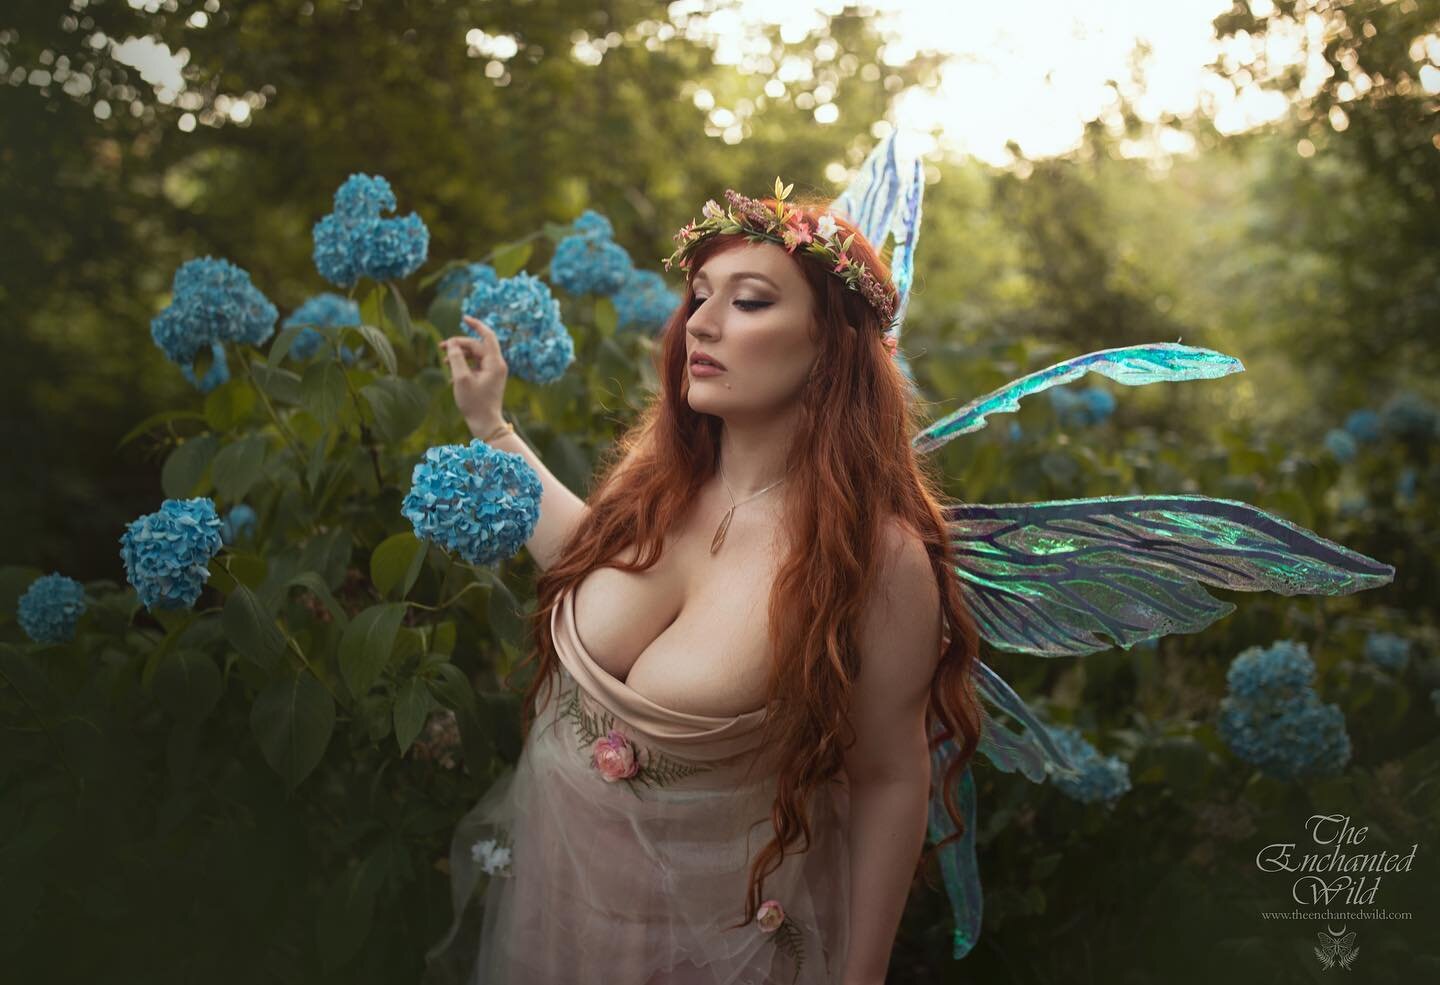 Surrounded by the beauty of flowers and darling friends during our fae picnic a few weeks ago.  Lingering a few extra moments to appreciate these hydrangeas in the dwindling light. 🧚&zwj;♀️🌿
My wings and floral crowns are available to use for photo